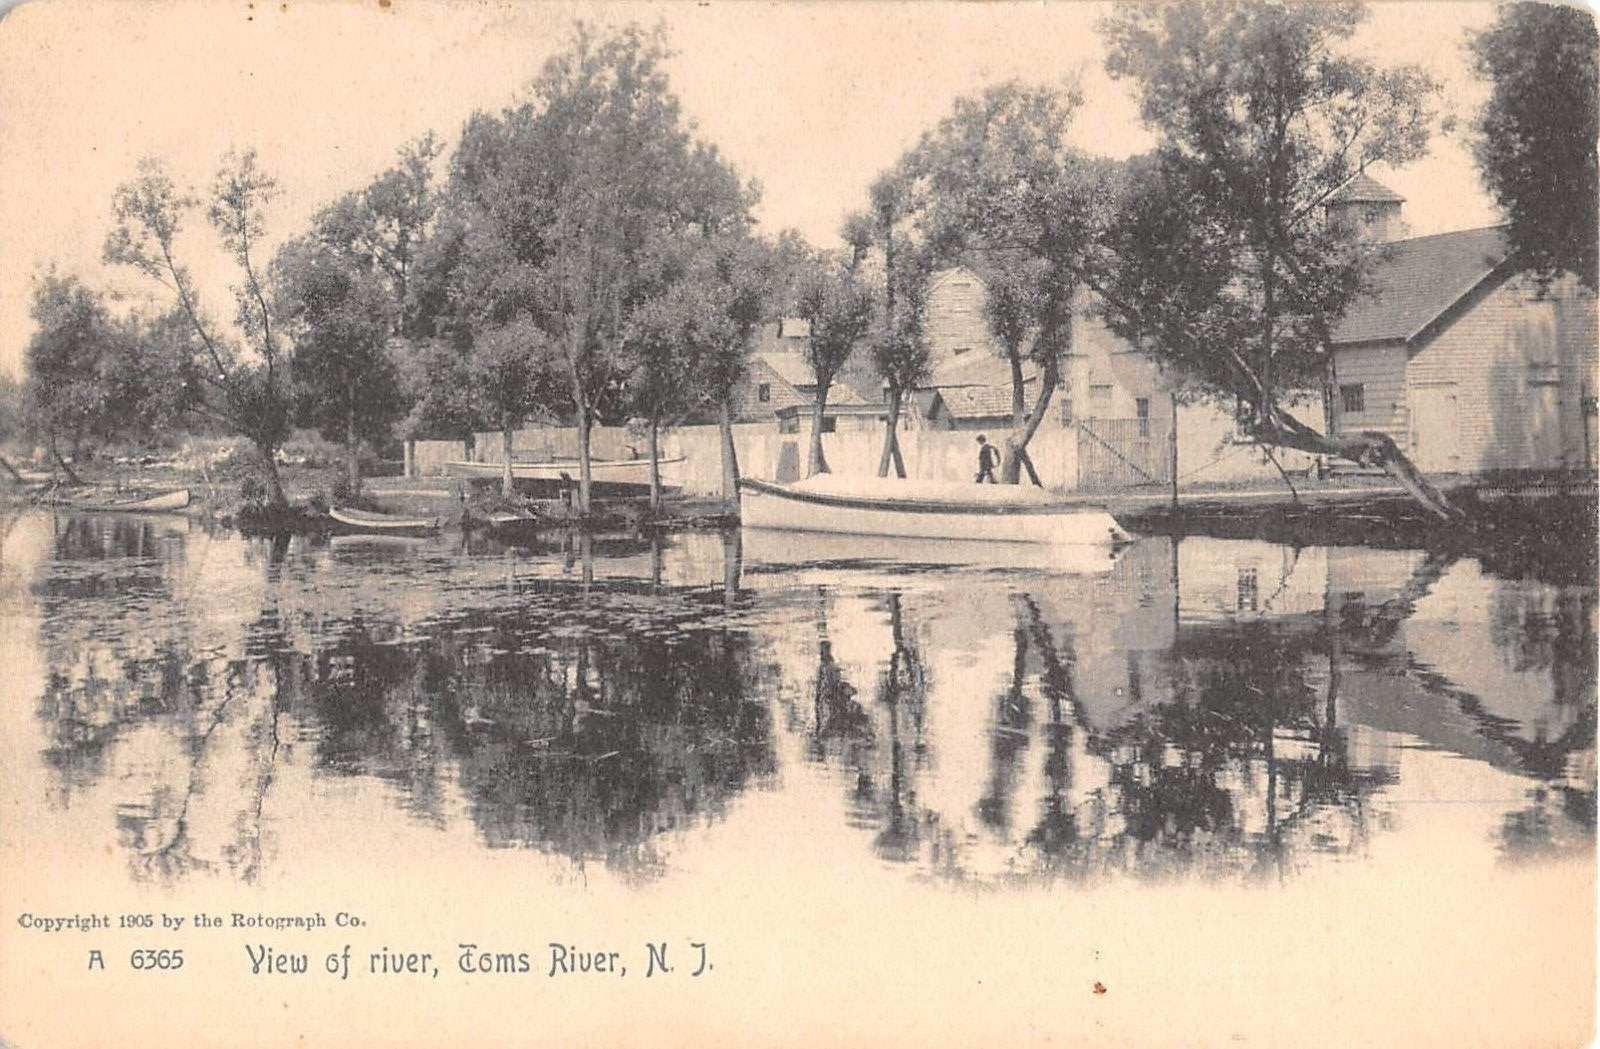 c.1905 View of River Toms River NJ post card